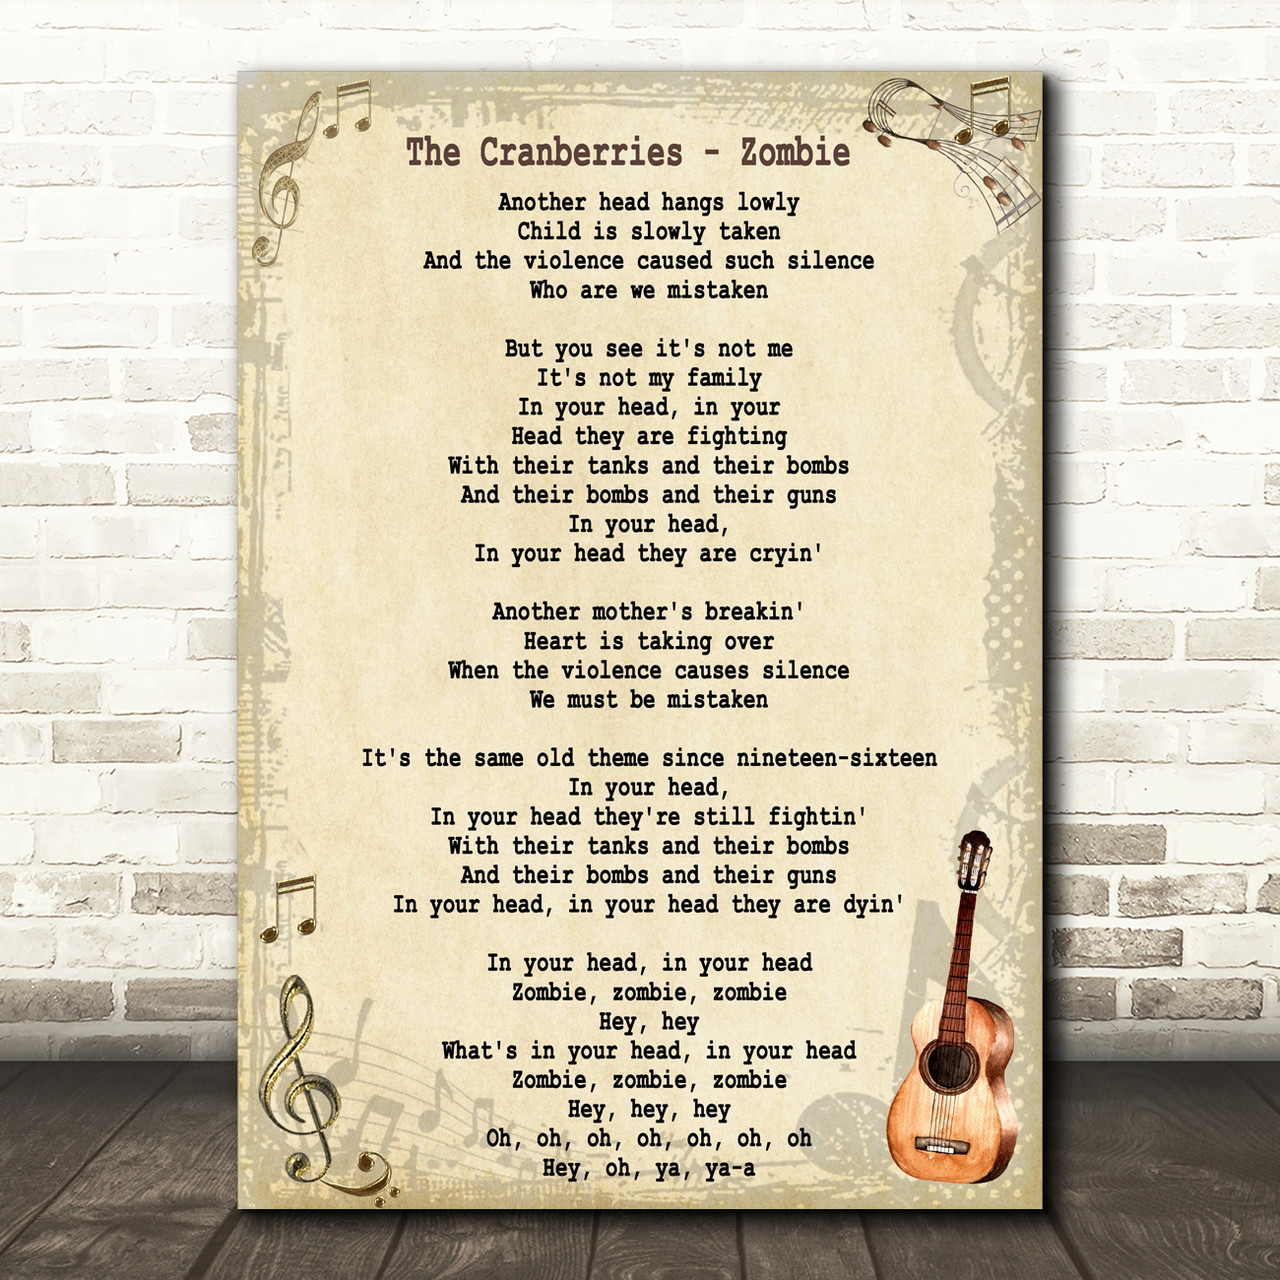 Zombie by The Cranberries Vintage Song Lyrics on Parchment Jigsaw Puzzle